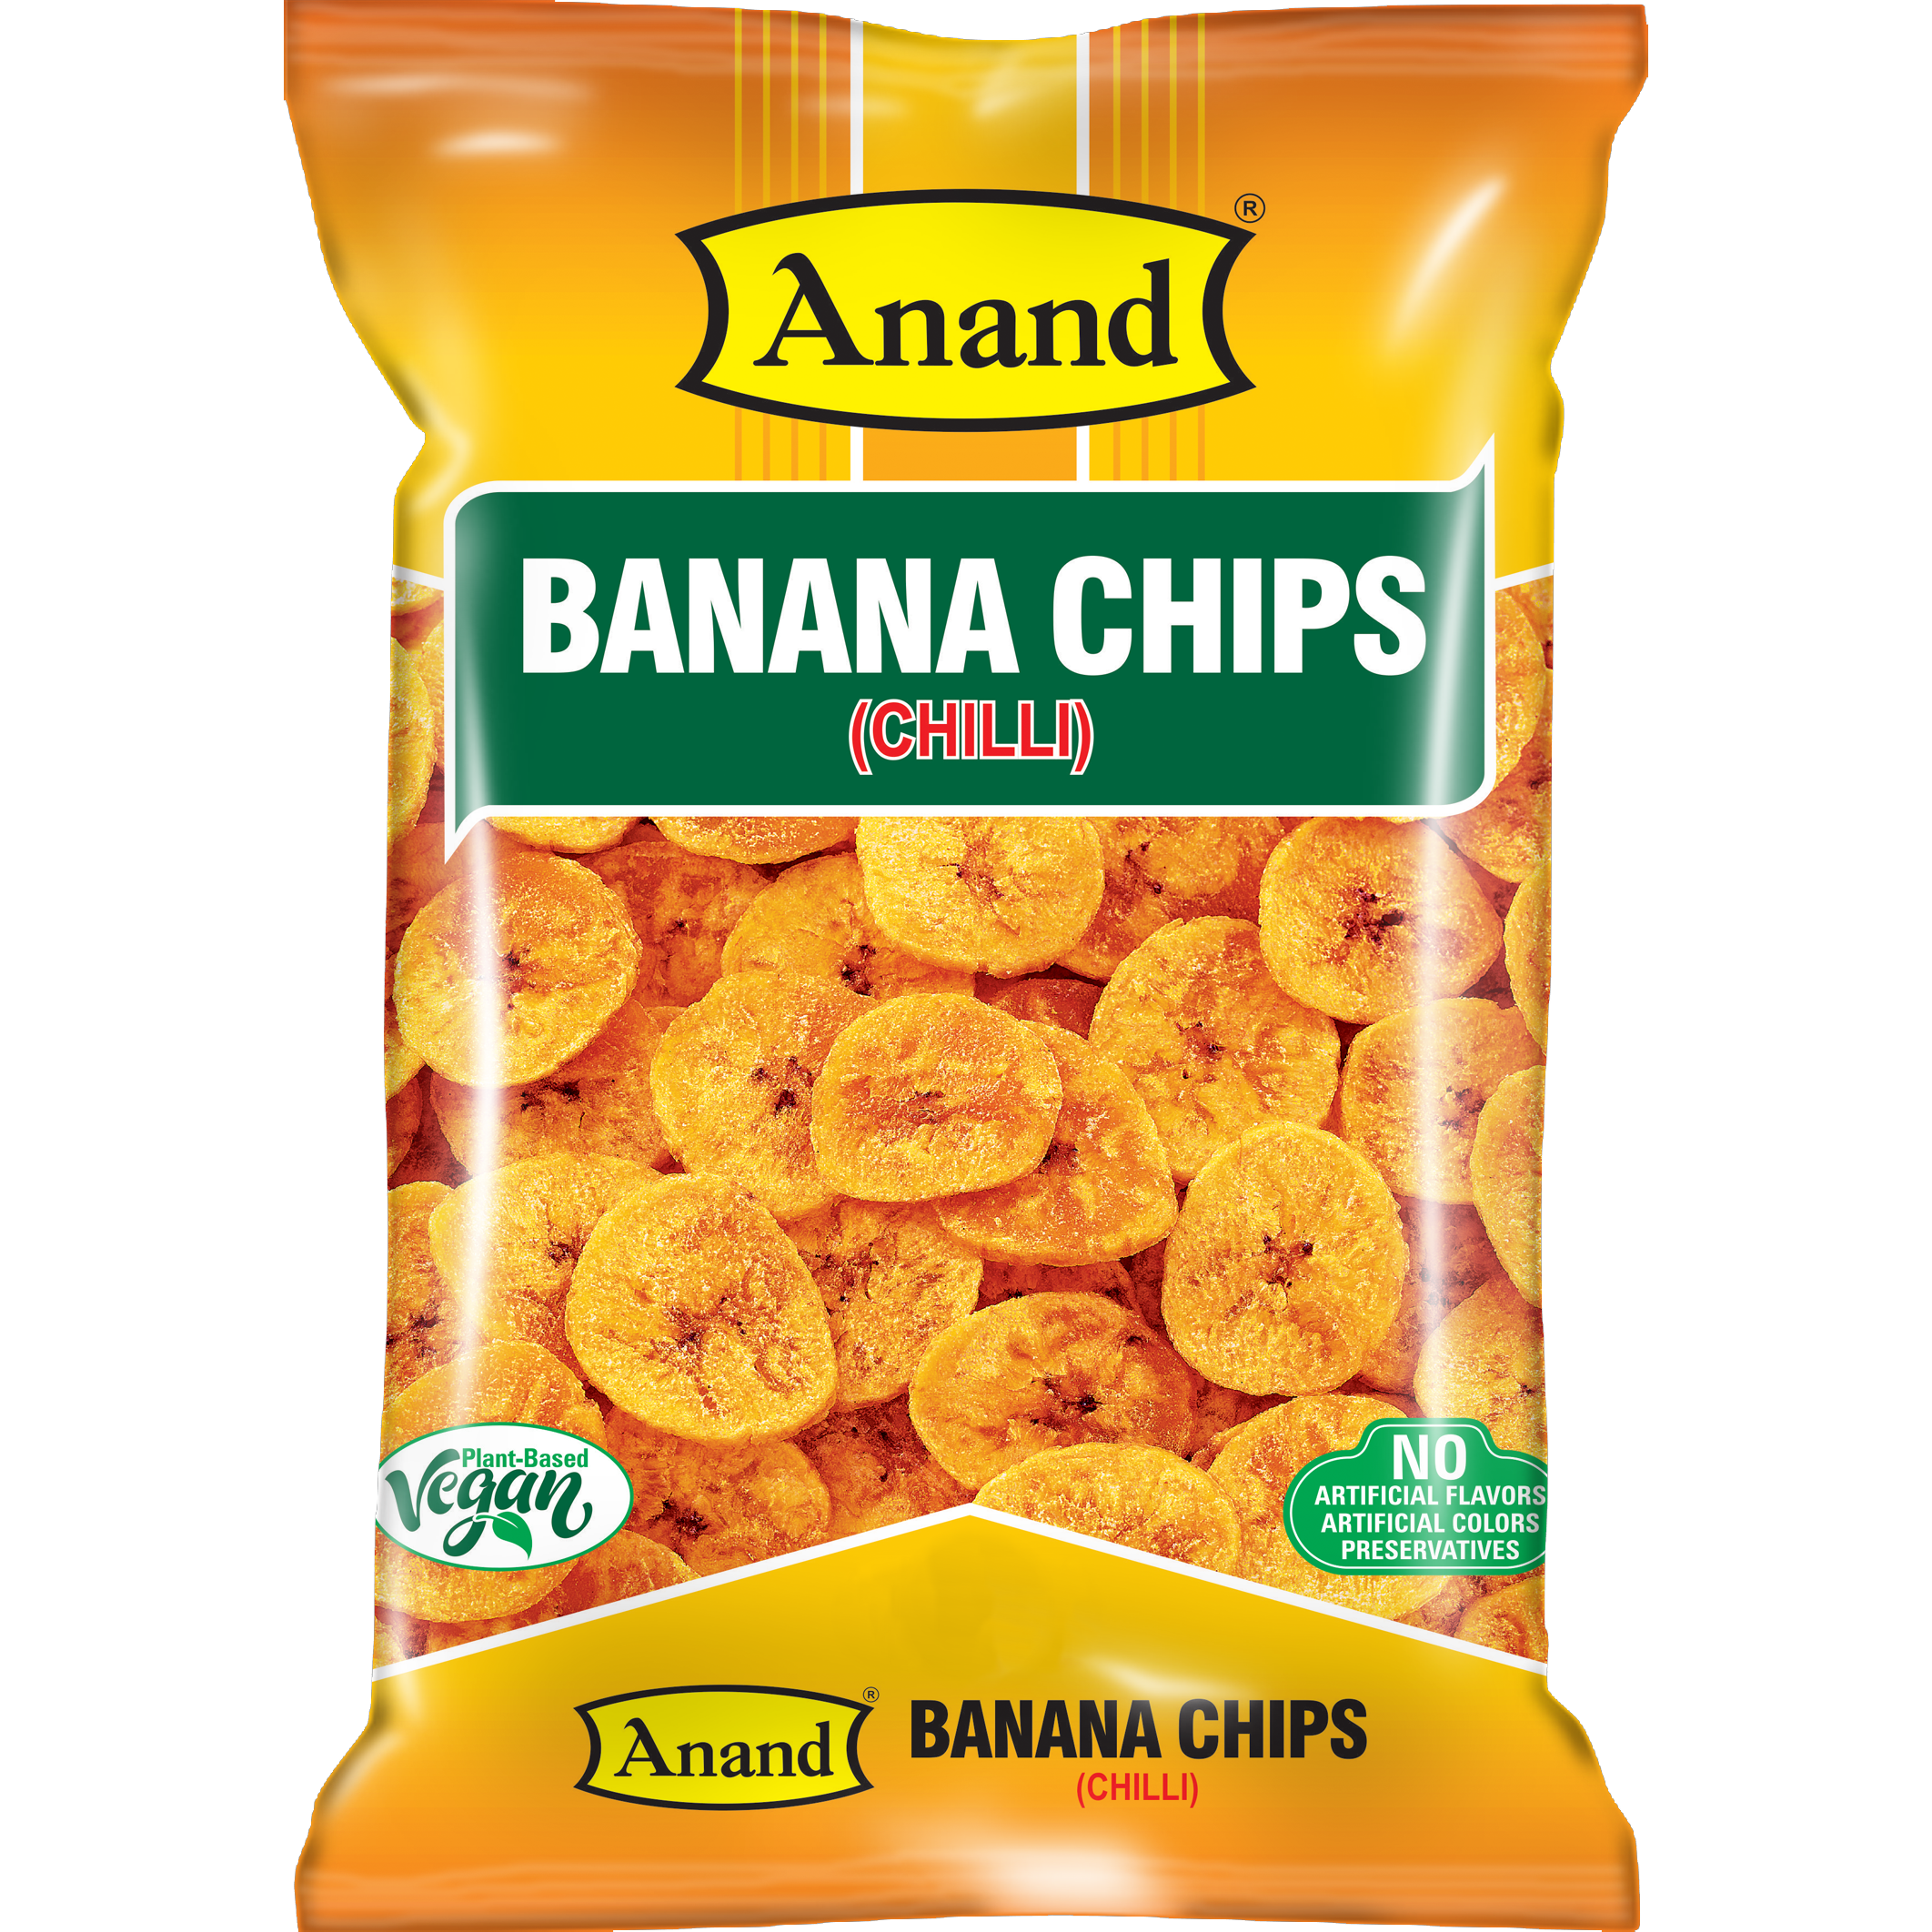 Pack of 3 - Anand Banana Chips Chilli - 170 Gm (6 Oz)